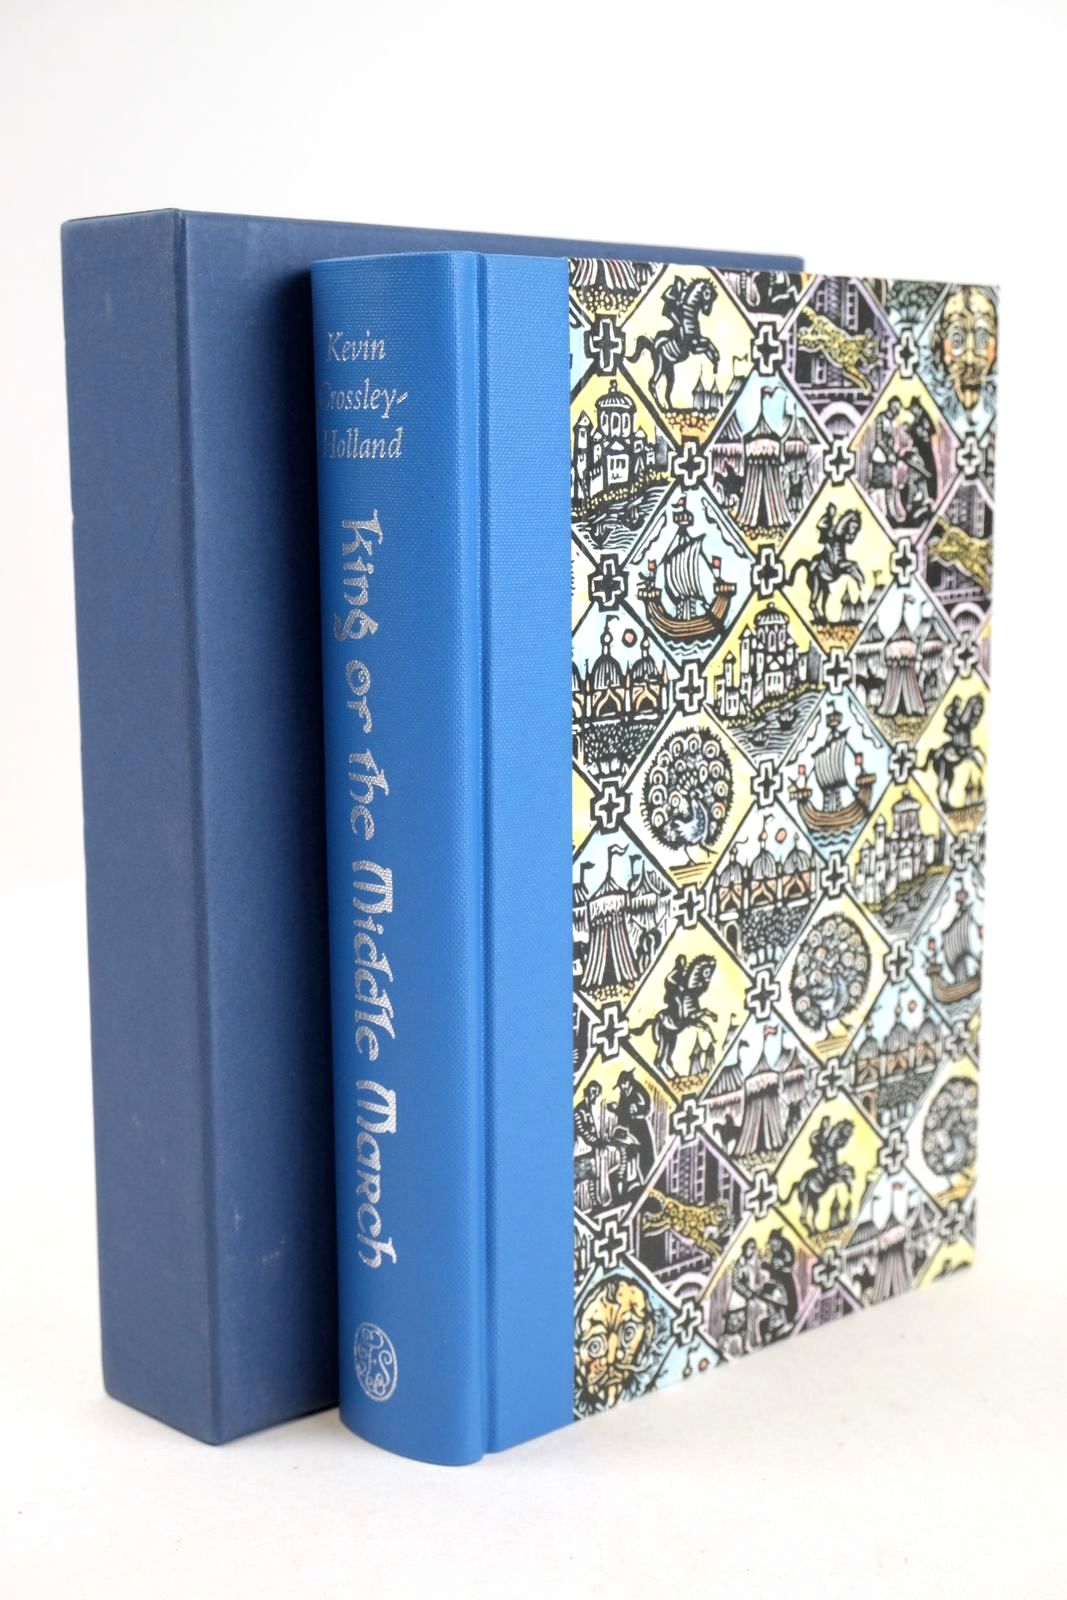 Photo of KING OF THE MIDDLE MARCH written by Crossley-Holland, Kevin illustrated by Lawrence, John published by Folio Society (STOCK CODE: 1325956)  for sale by Stella & Rose's Books